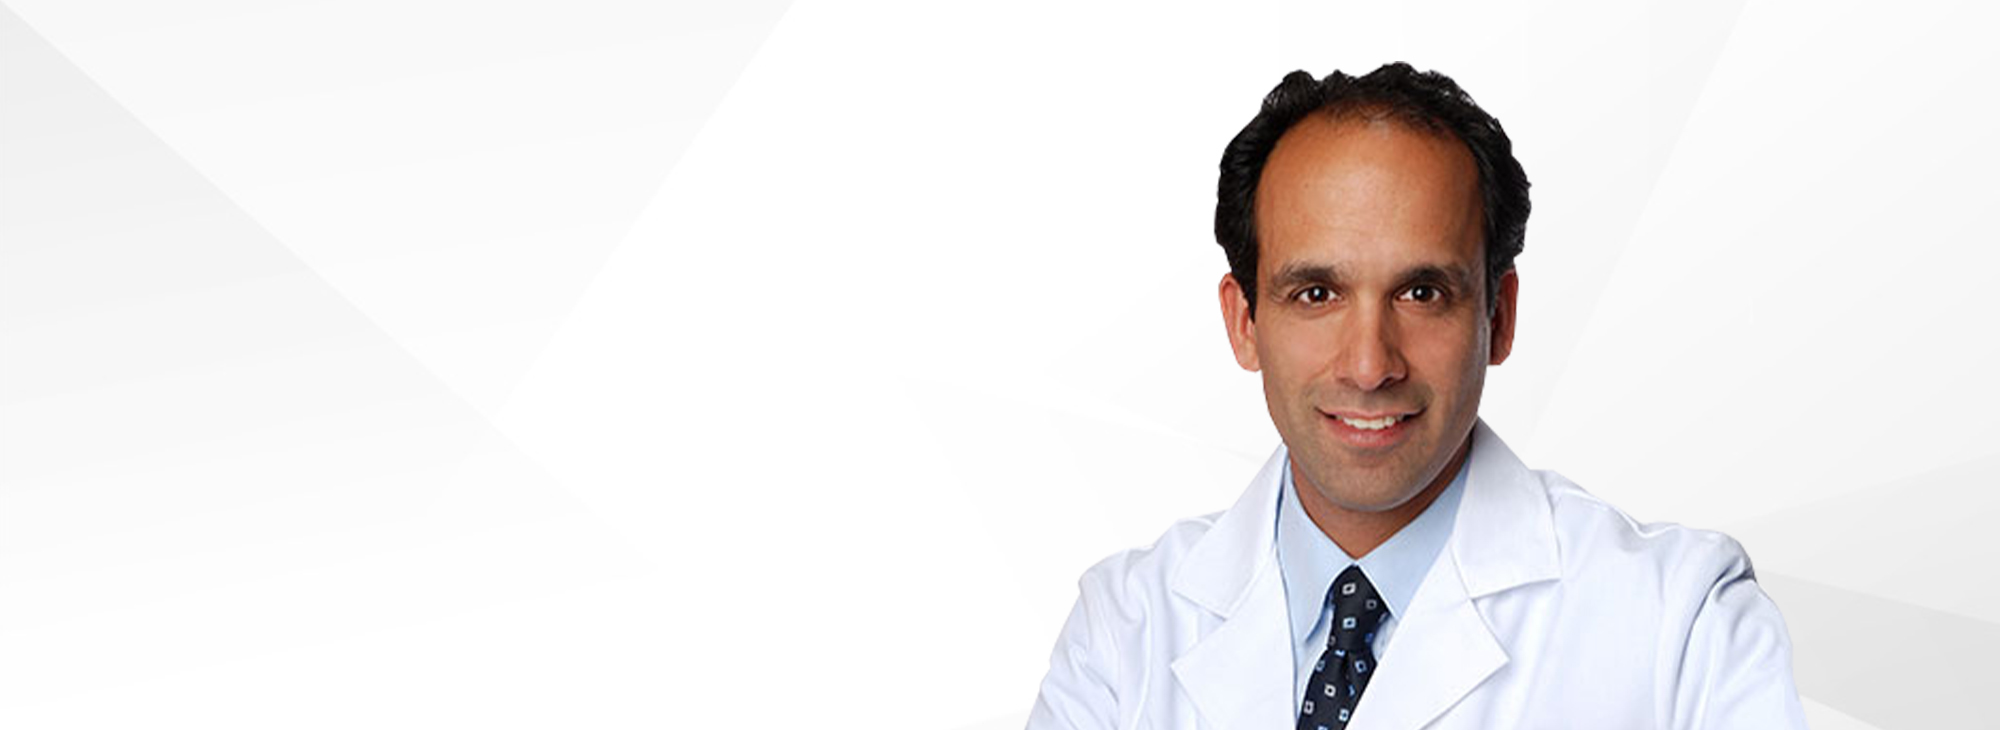 foot and ankle doctors near syracuse ny image of Naven Duggal, MD from Syracuse Orthopedic Specialists